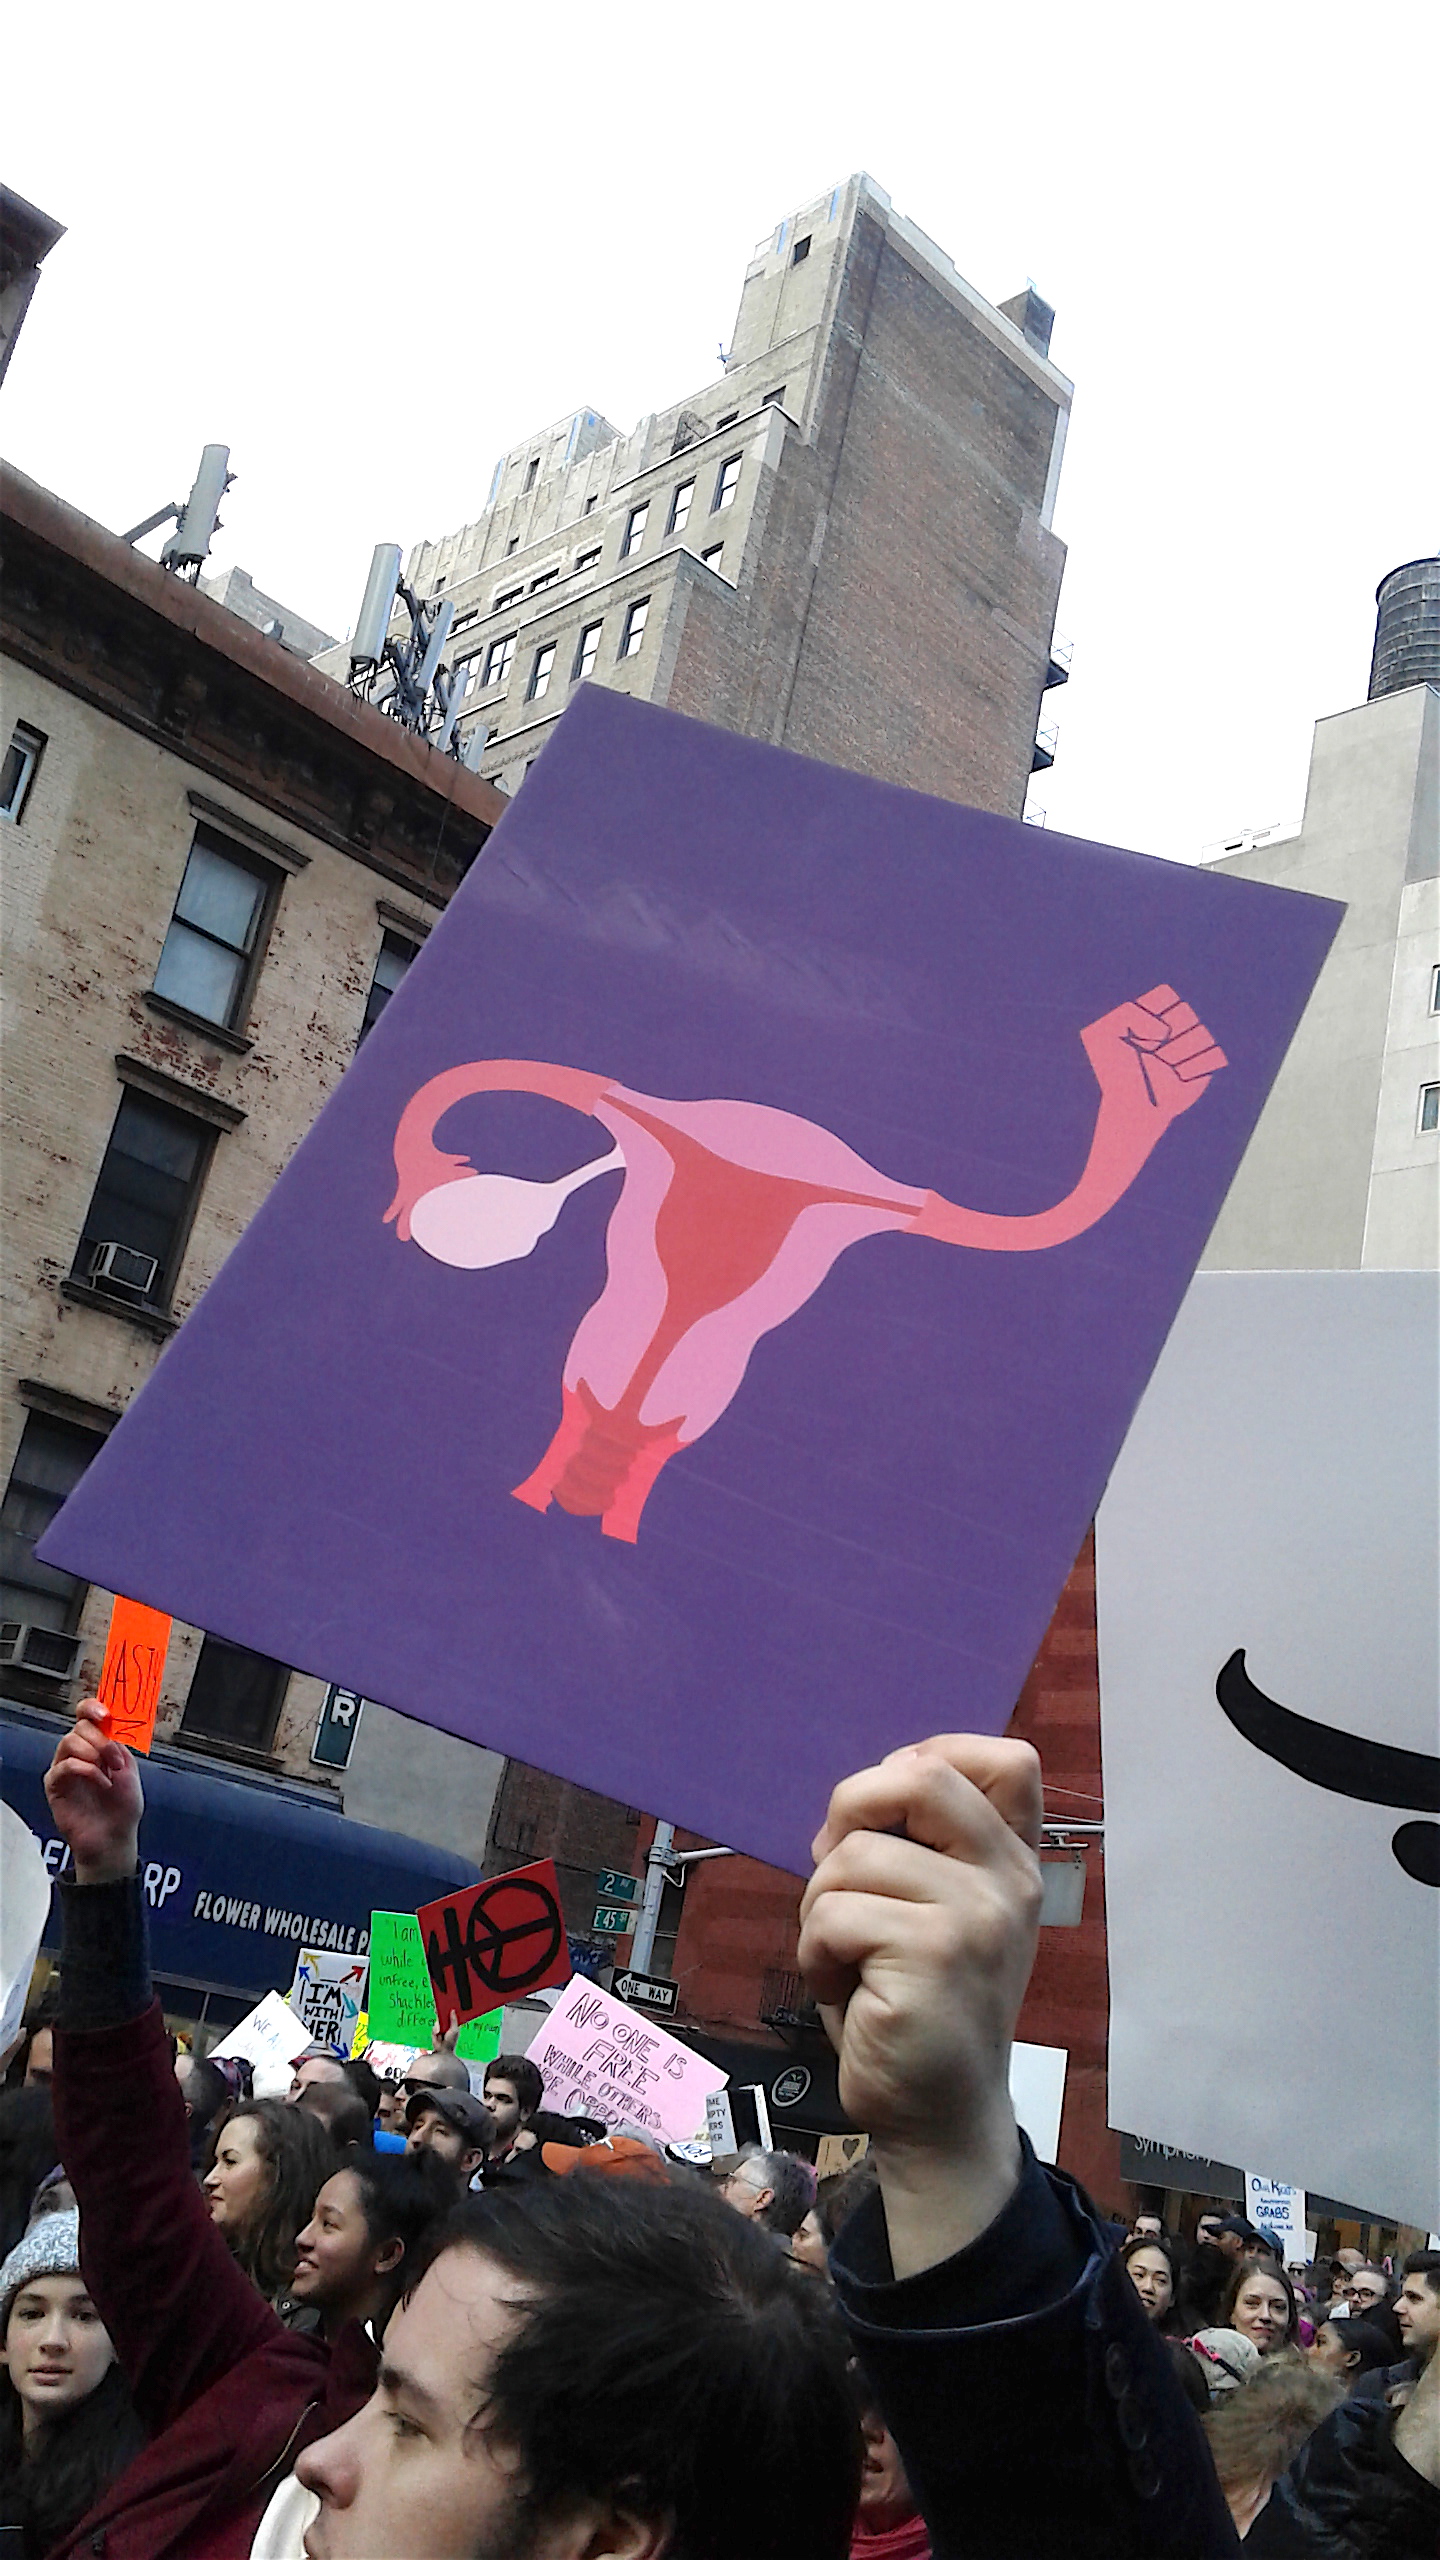 They marched for a woman's right to choose, among many other issues.